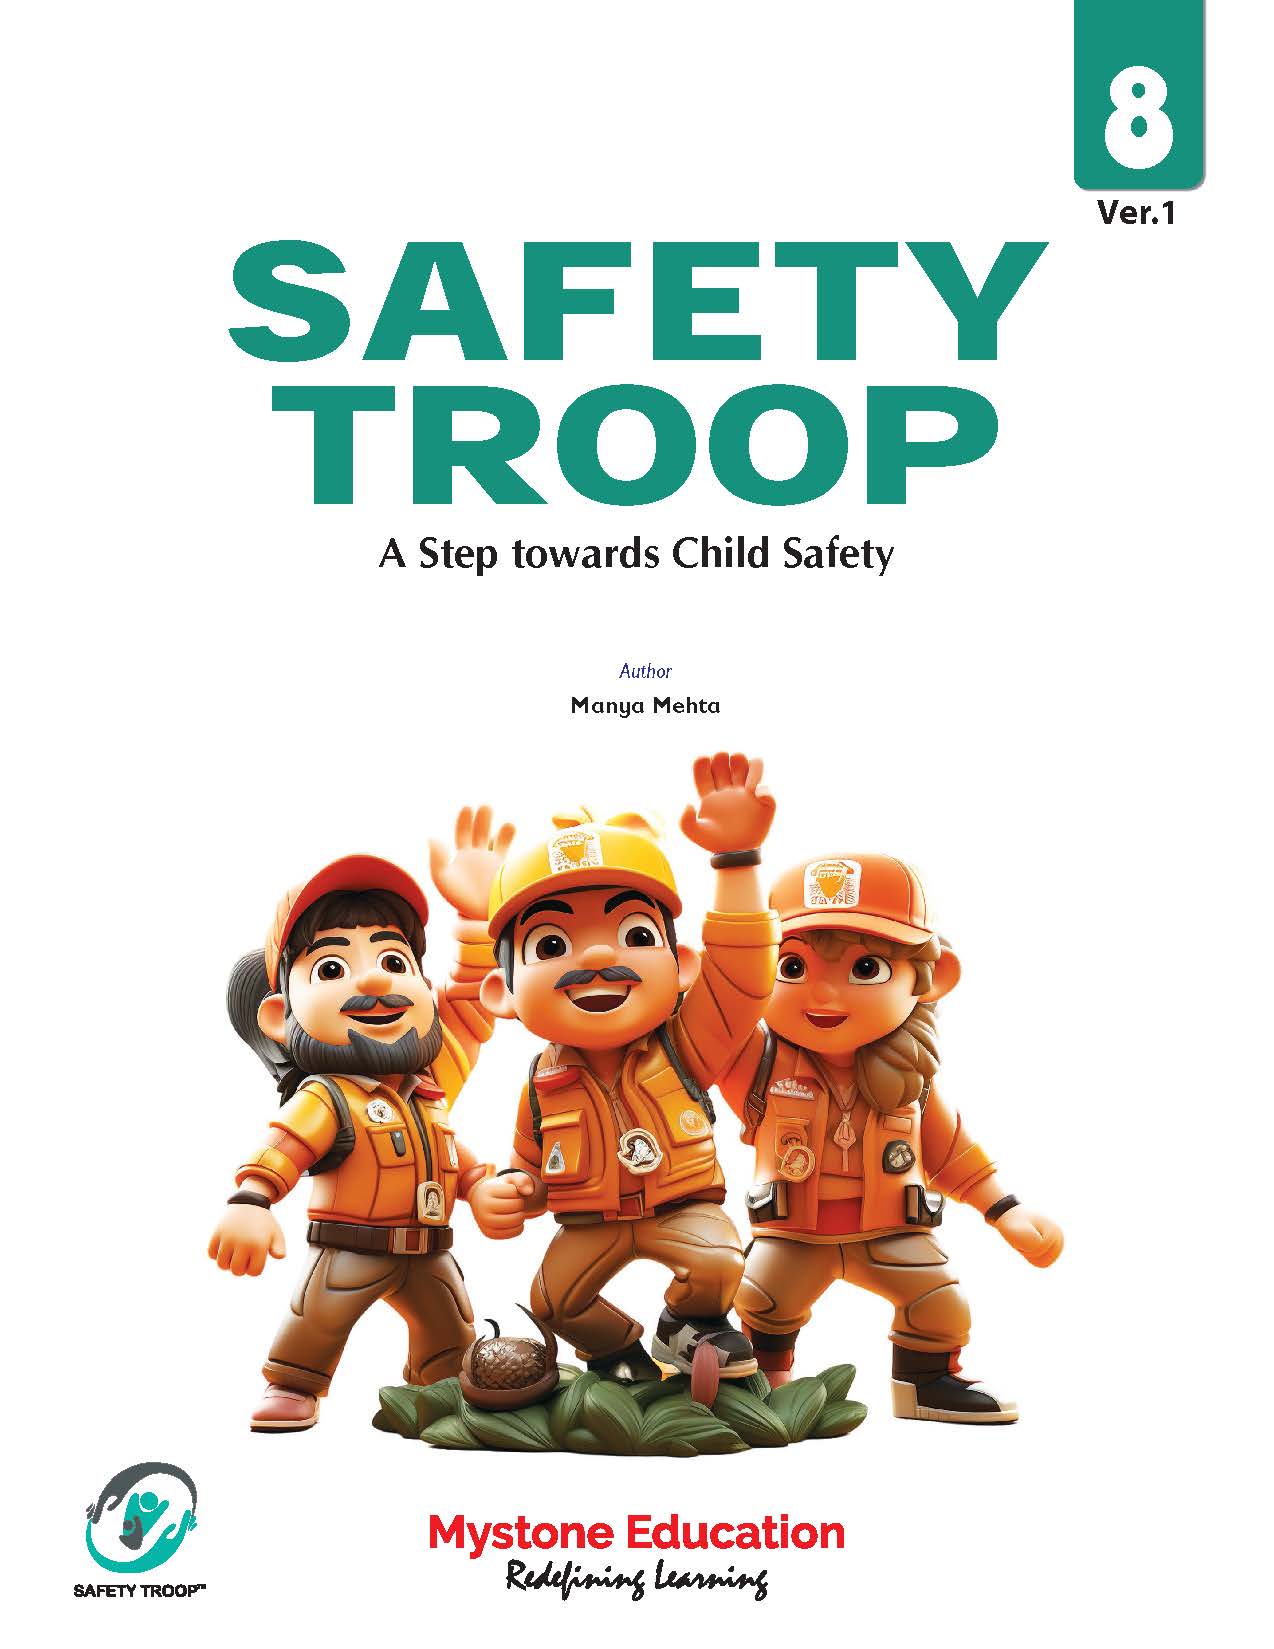 Safety Troop (A Step Towards Child Safety) Class 8 Ver 1